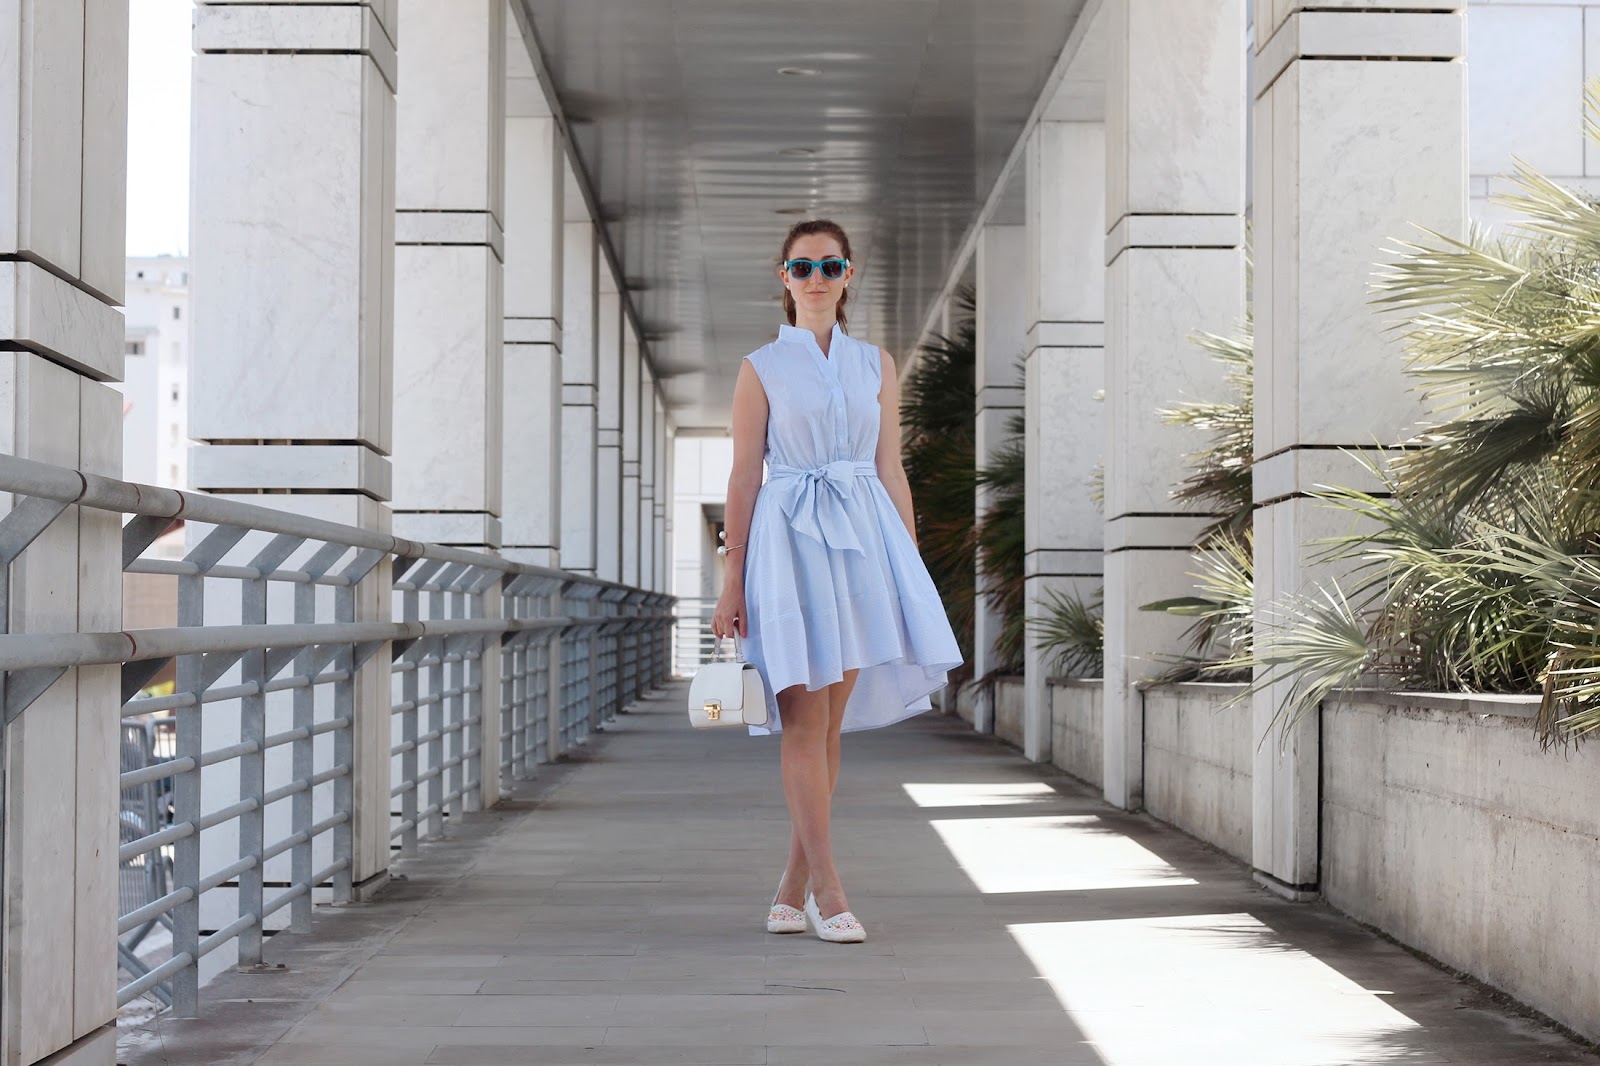 fashion style blogger outfit ootd italian girl italy trend vogue glamour pescara new look bag chic wish dress stripes blue cookeries london flats ballet shoes